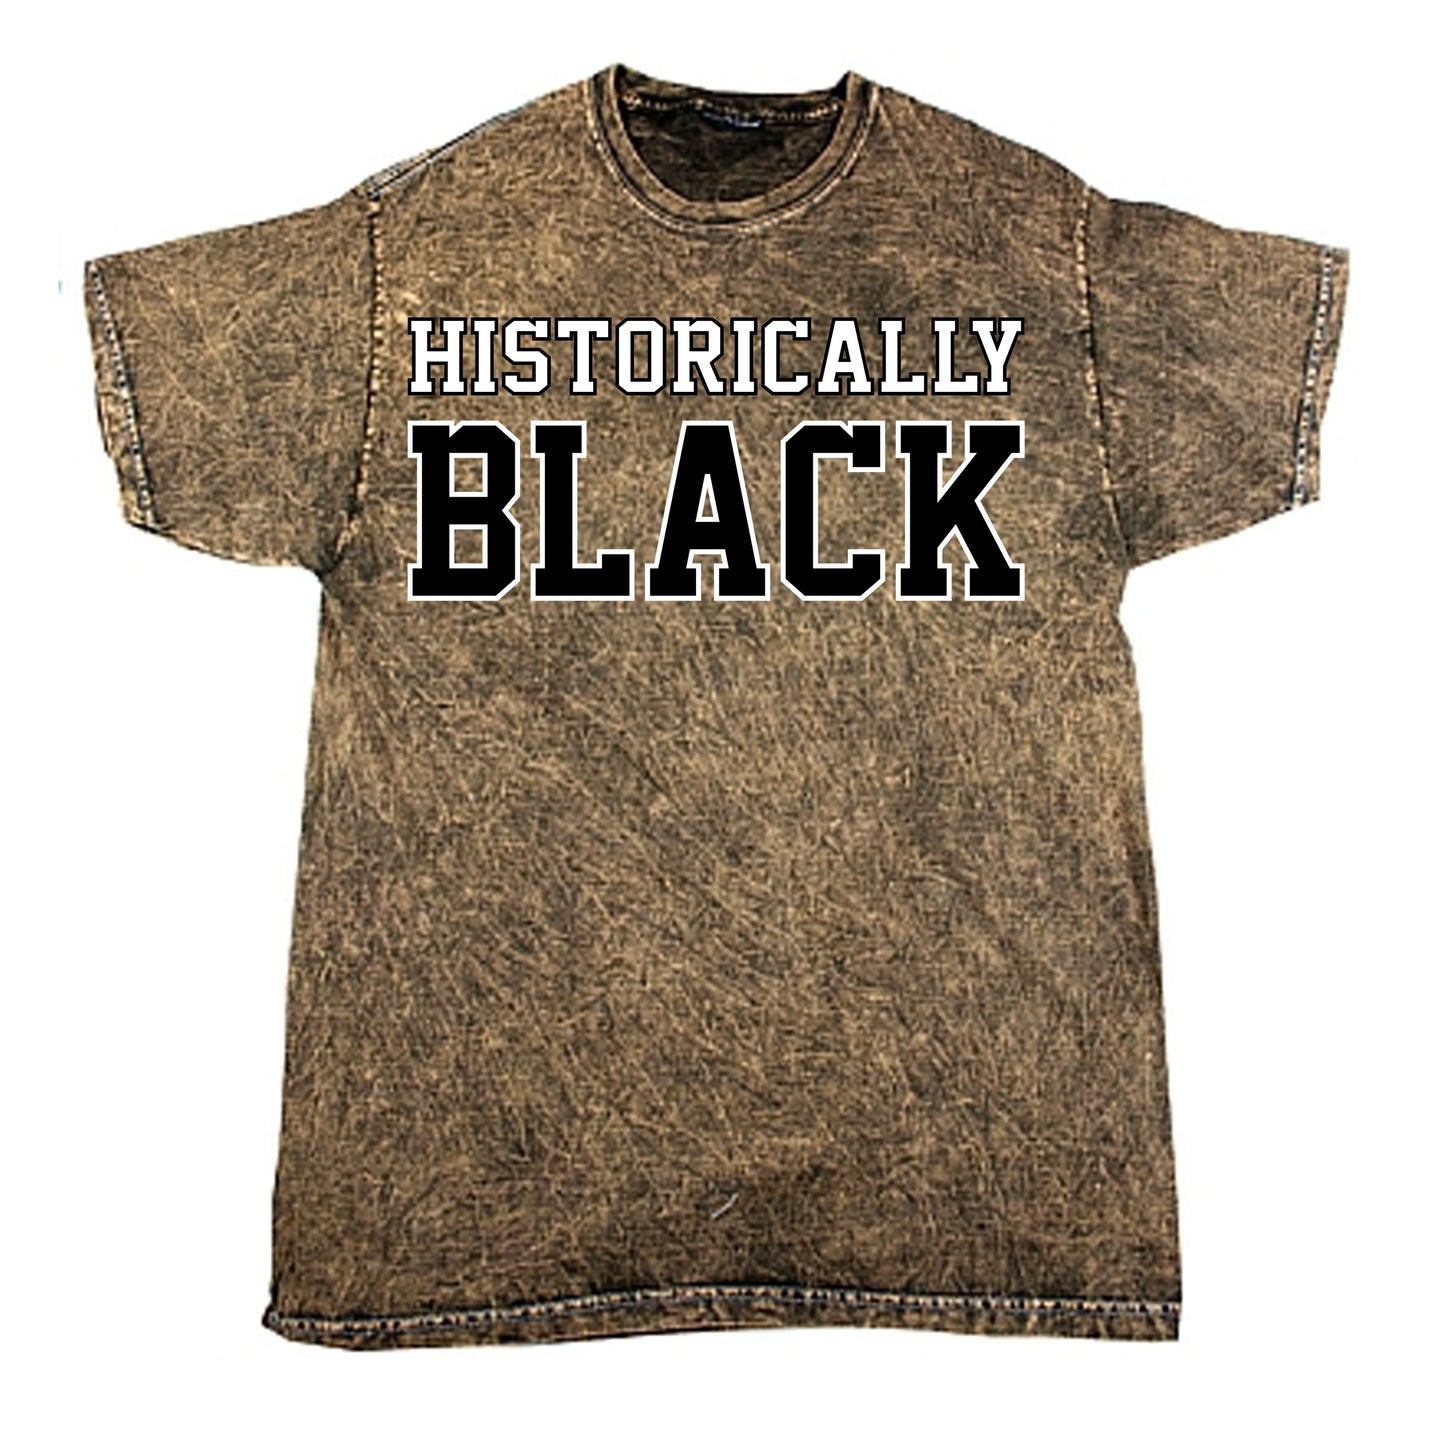 Historically Black Mineral Washed Tee - Brown